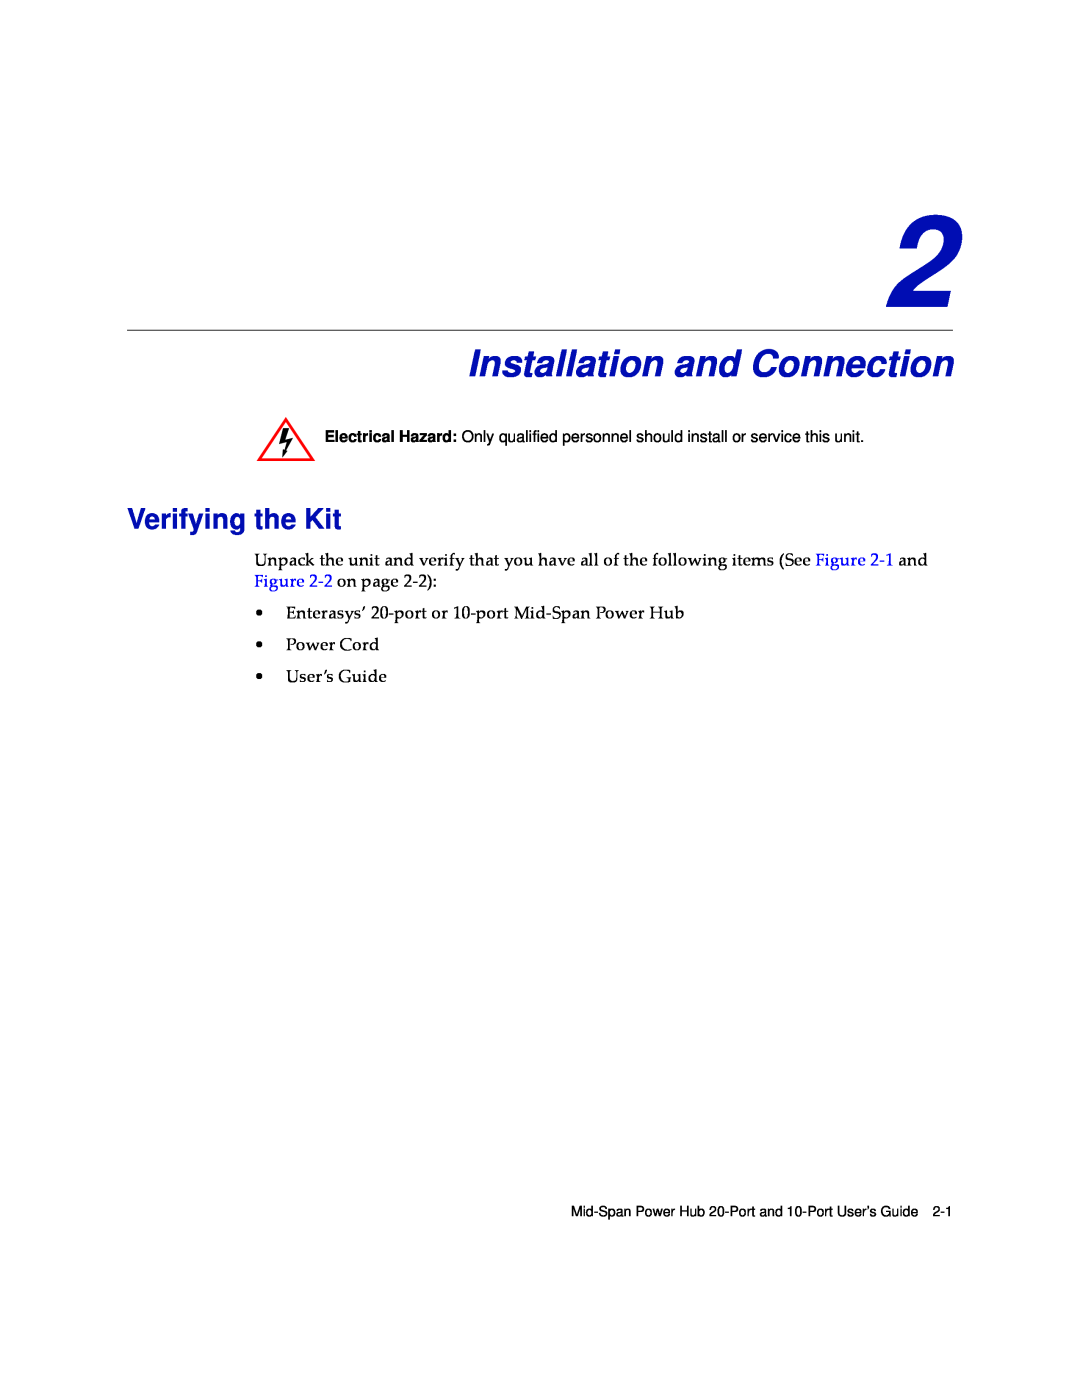 Enterasys Networks BL-89720ENT, BL-89520ENT, BL-89620ENT, BL-89420ENT manual Installation and Connection, Verifying the Kit 